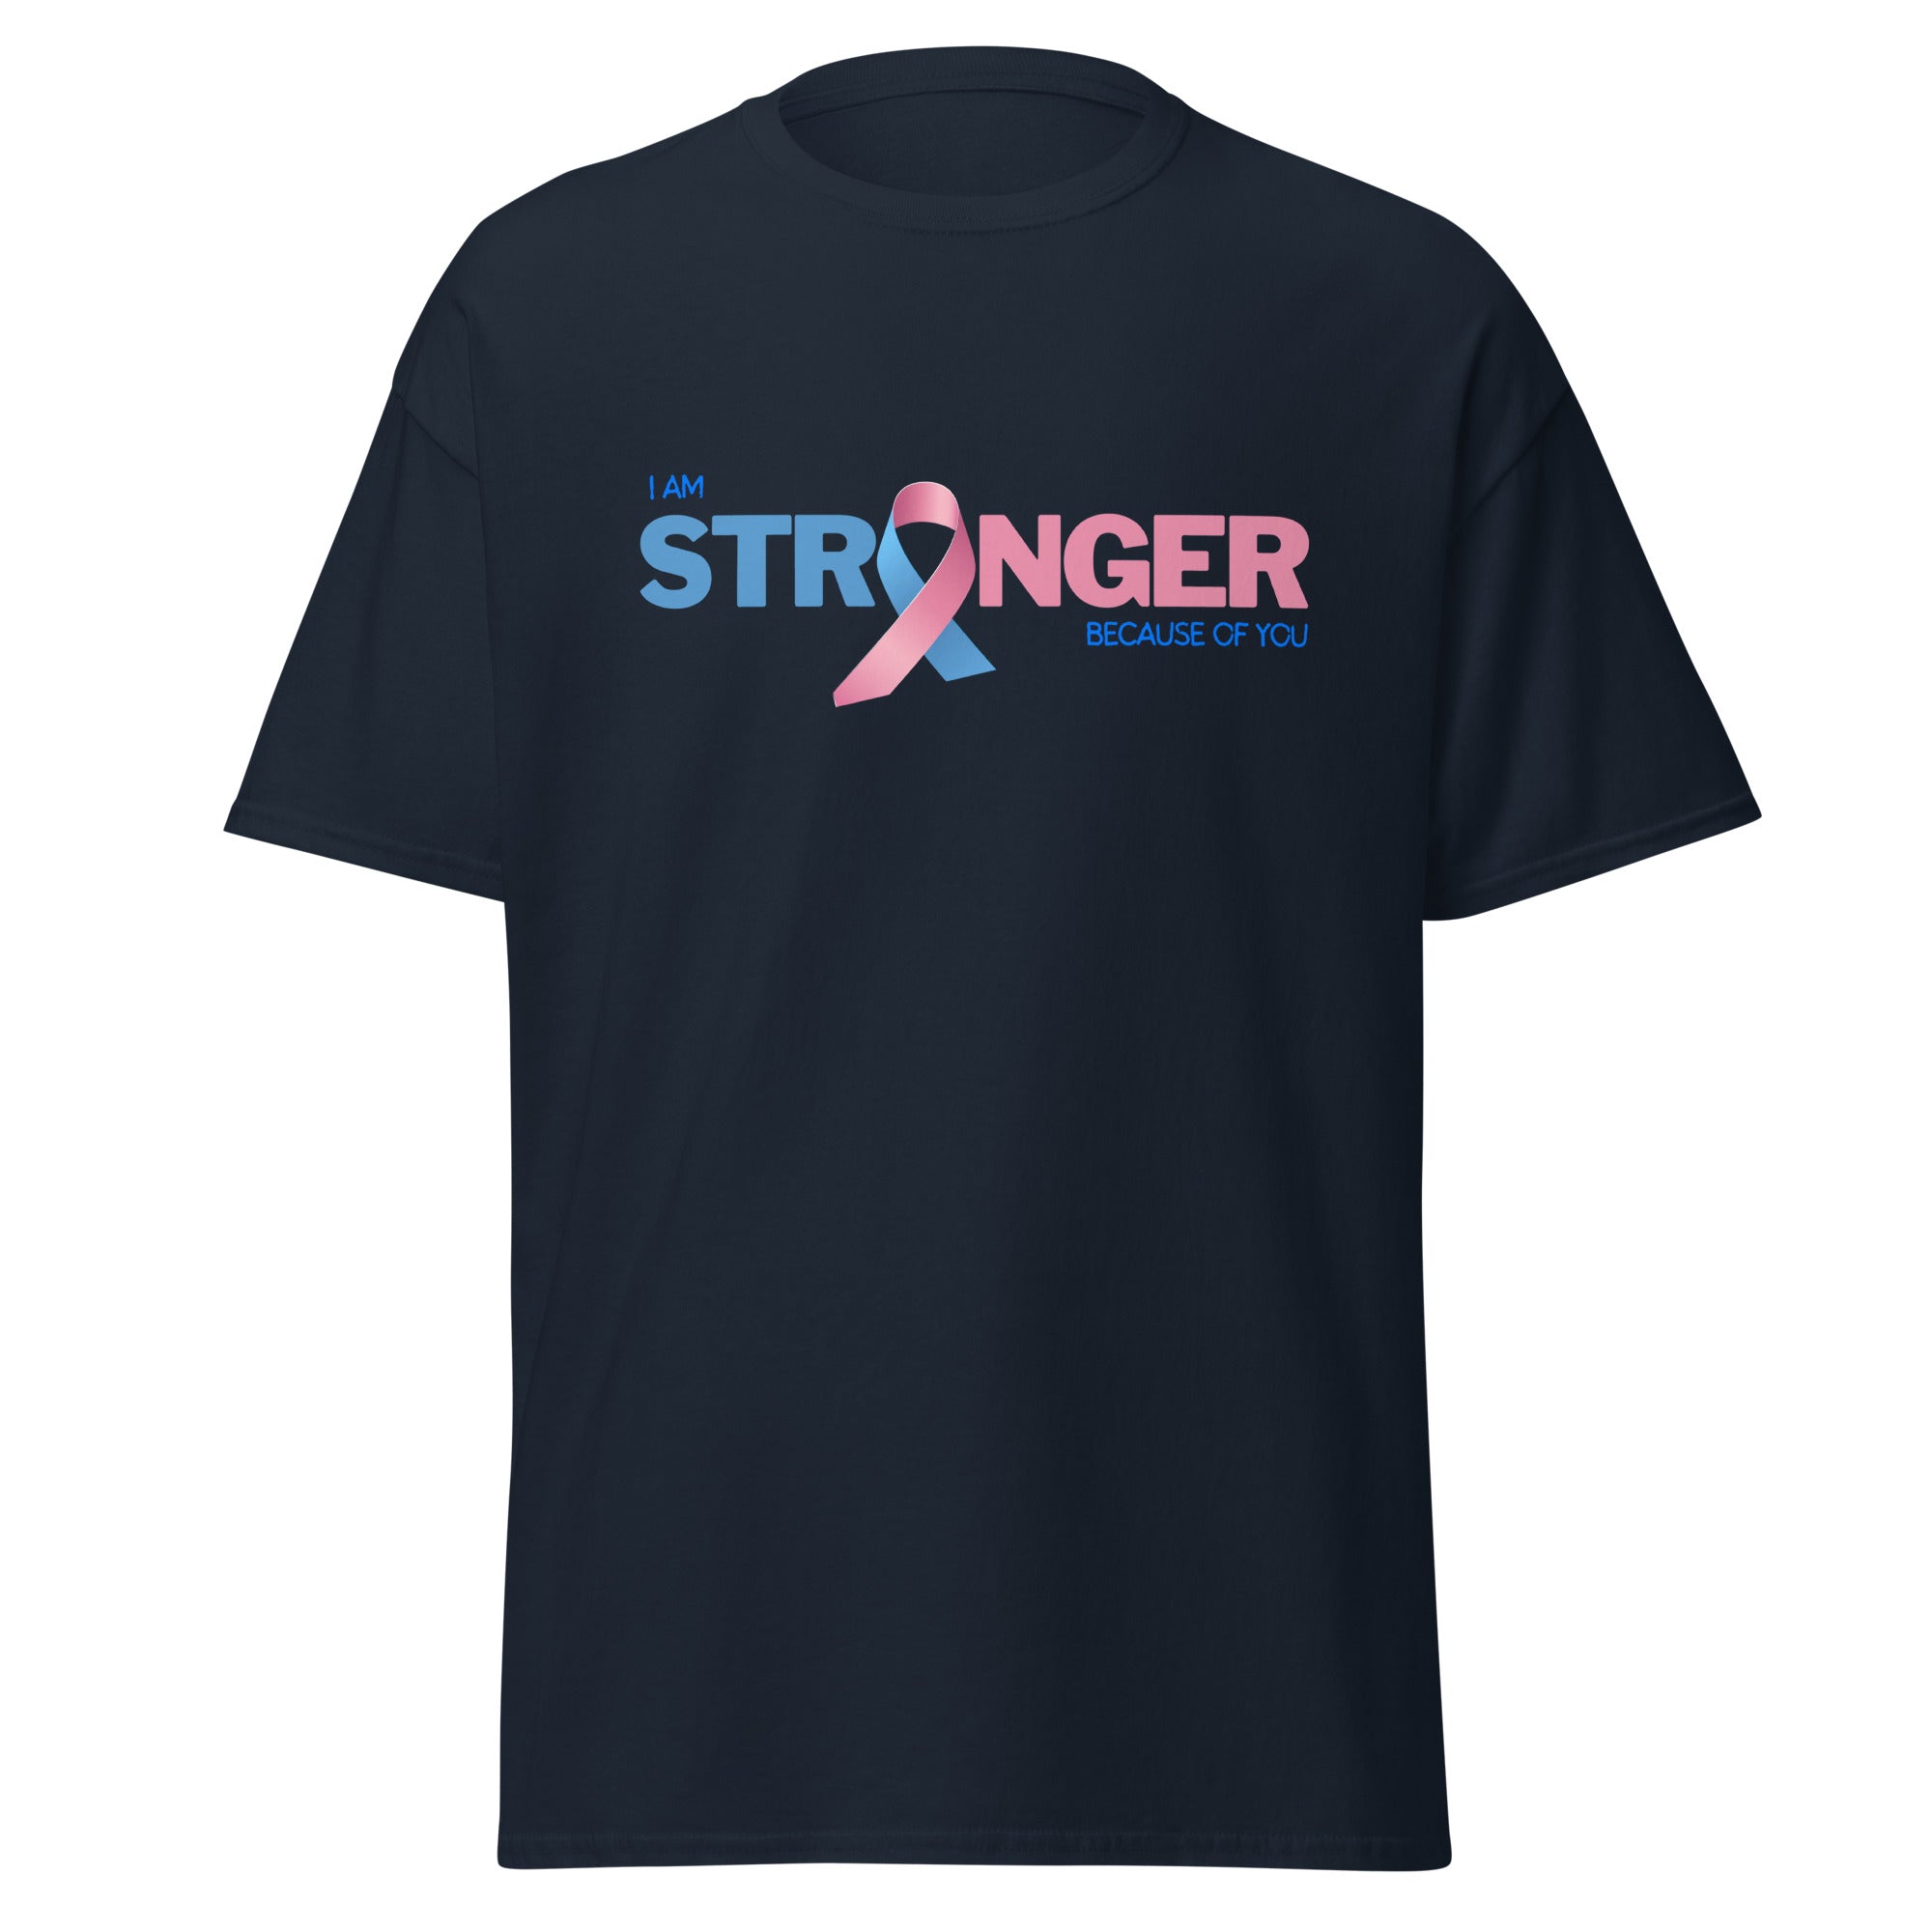 I am Stronger Because of You Unisex Classic Tee